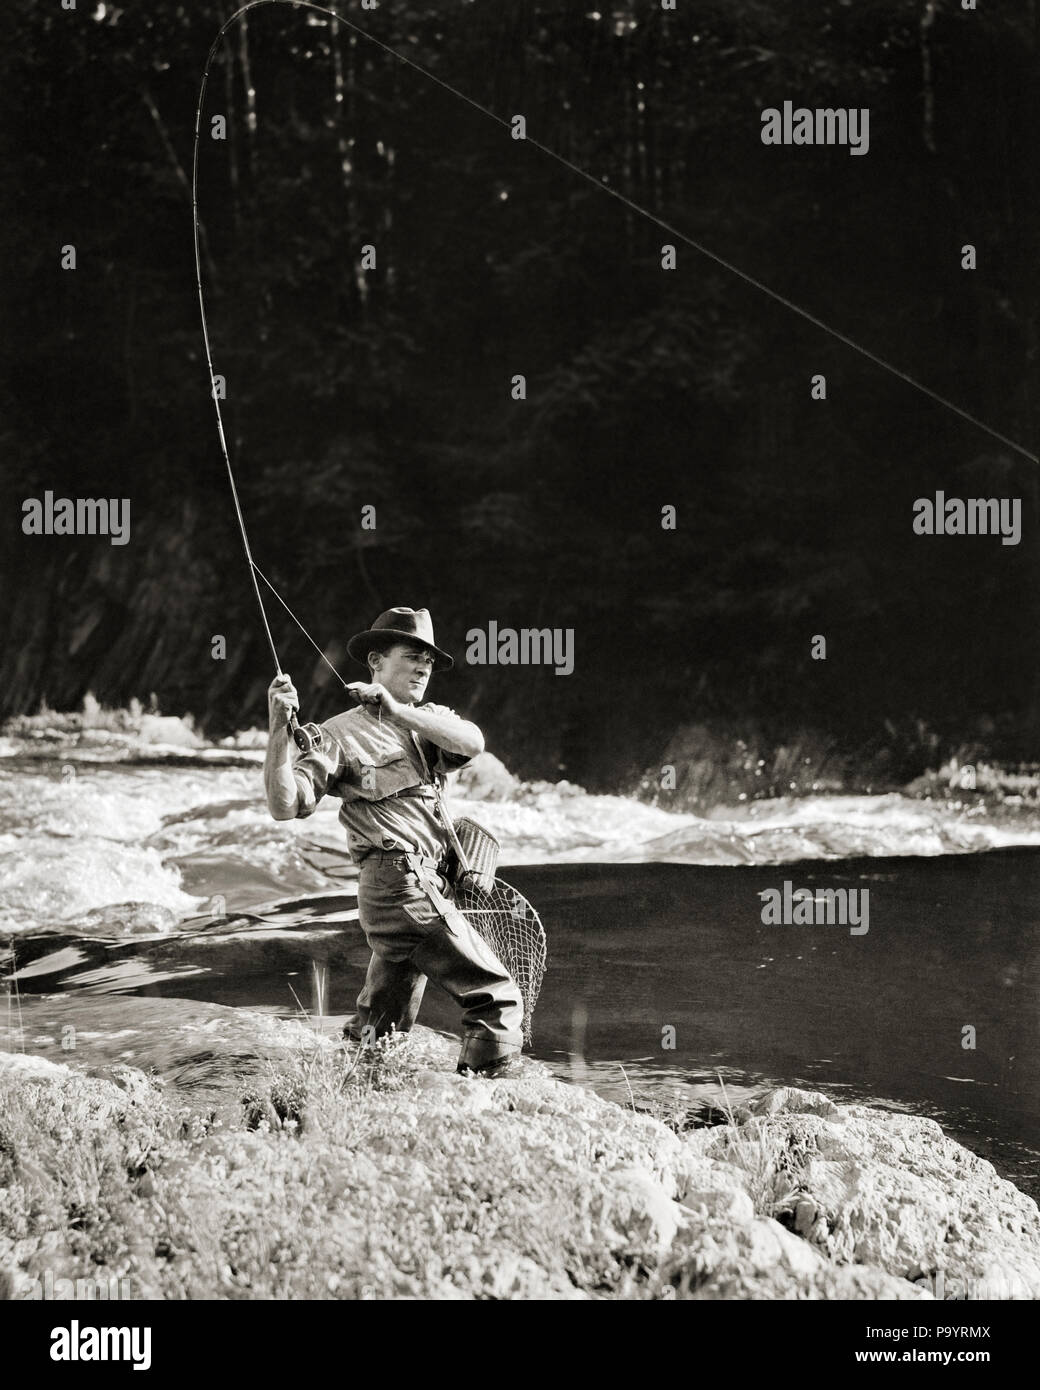 1920s MAN ANGLER FLY FISHING CASTING WITH ROD REEL CREEL AND LANDING NET -  a454 HAR001 HARS SPIRITUALITY ANGLER B&W FREEDOM ACTIVITY DREAMS HAPPINESS  PHYSICAL STRENGTHENING ADVENTURE LEISURE STRENGTH SELF ESTEEM EXCITEMENT